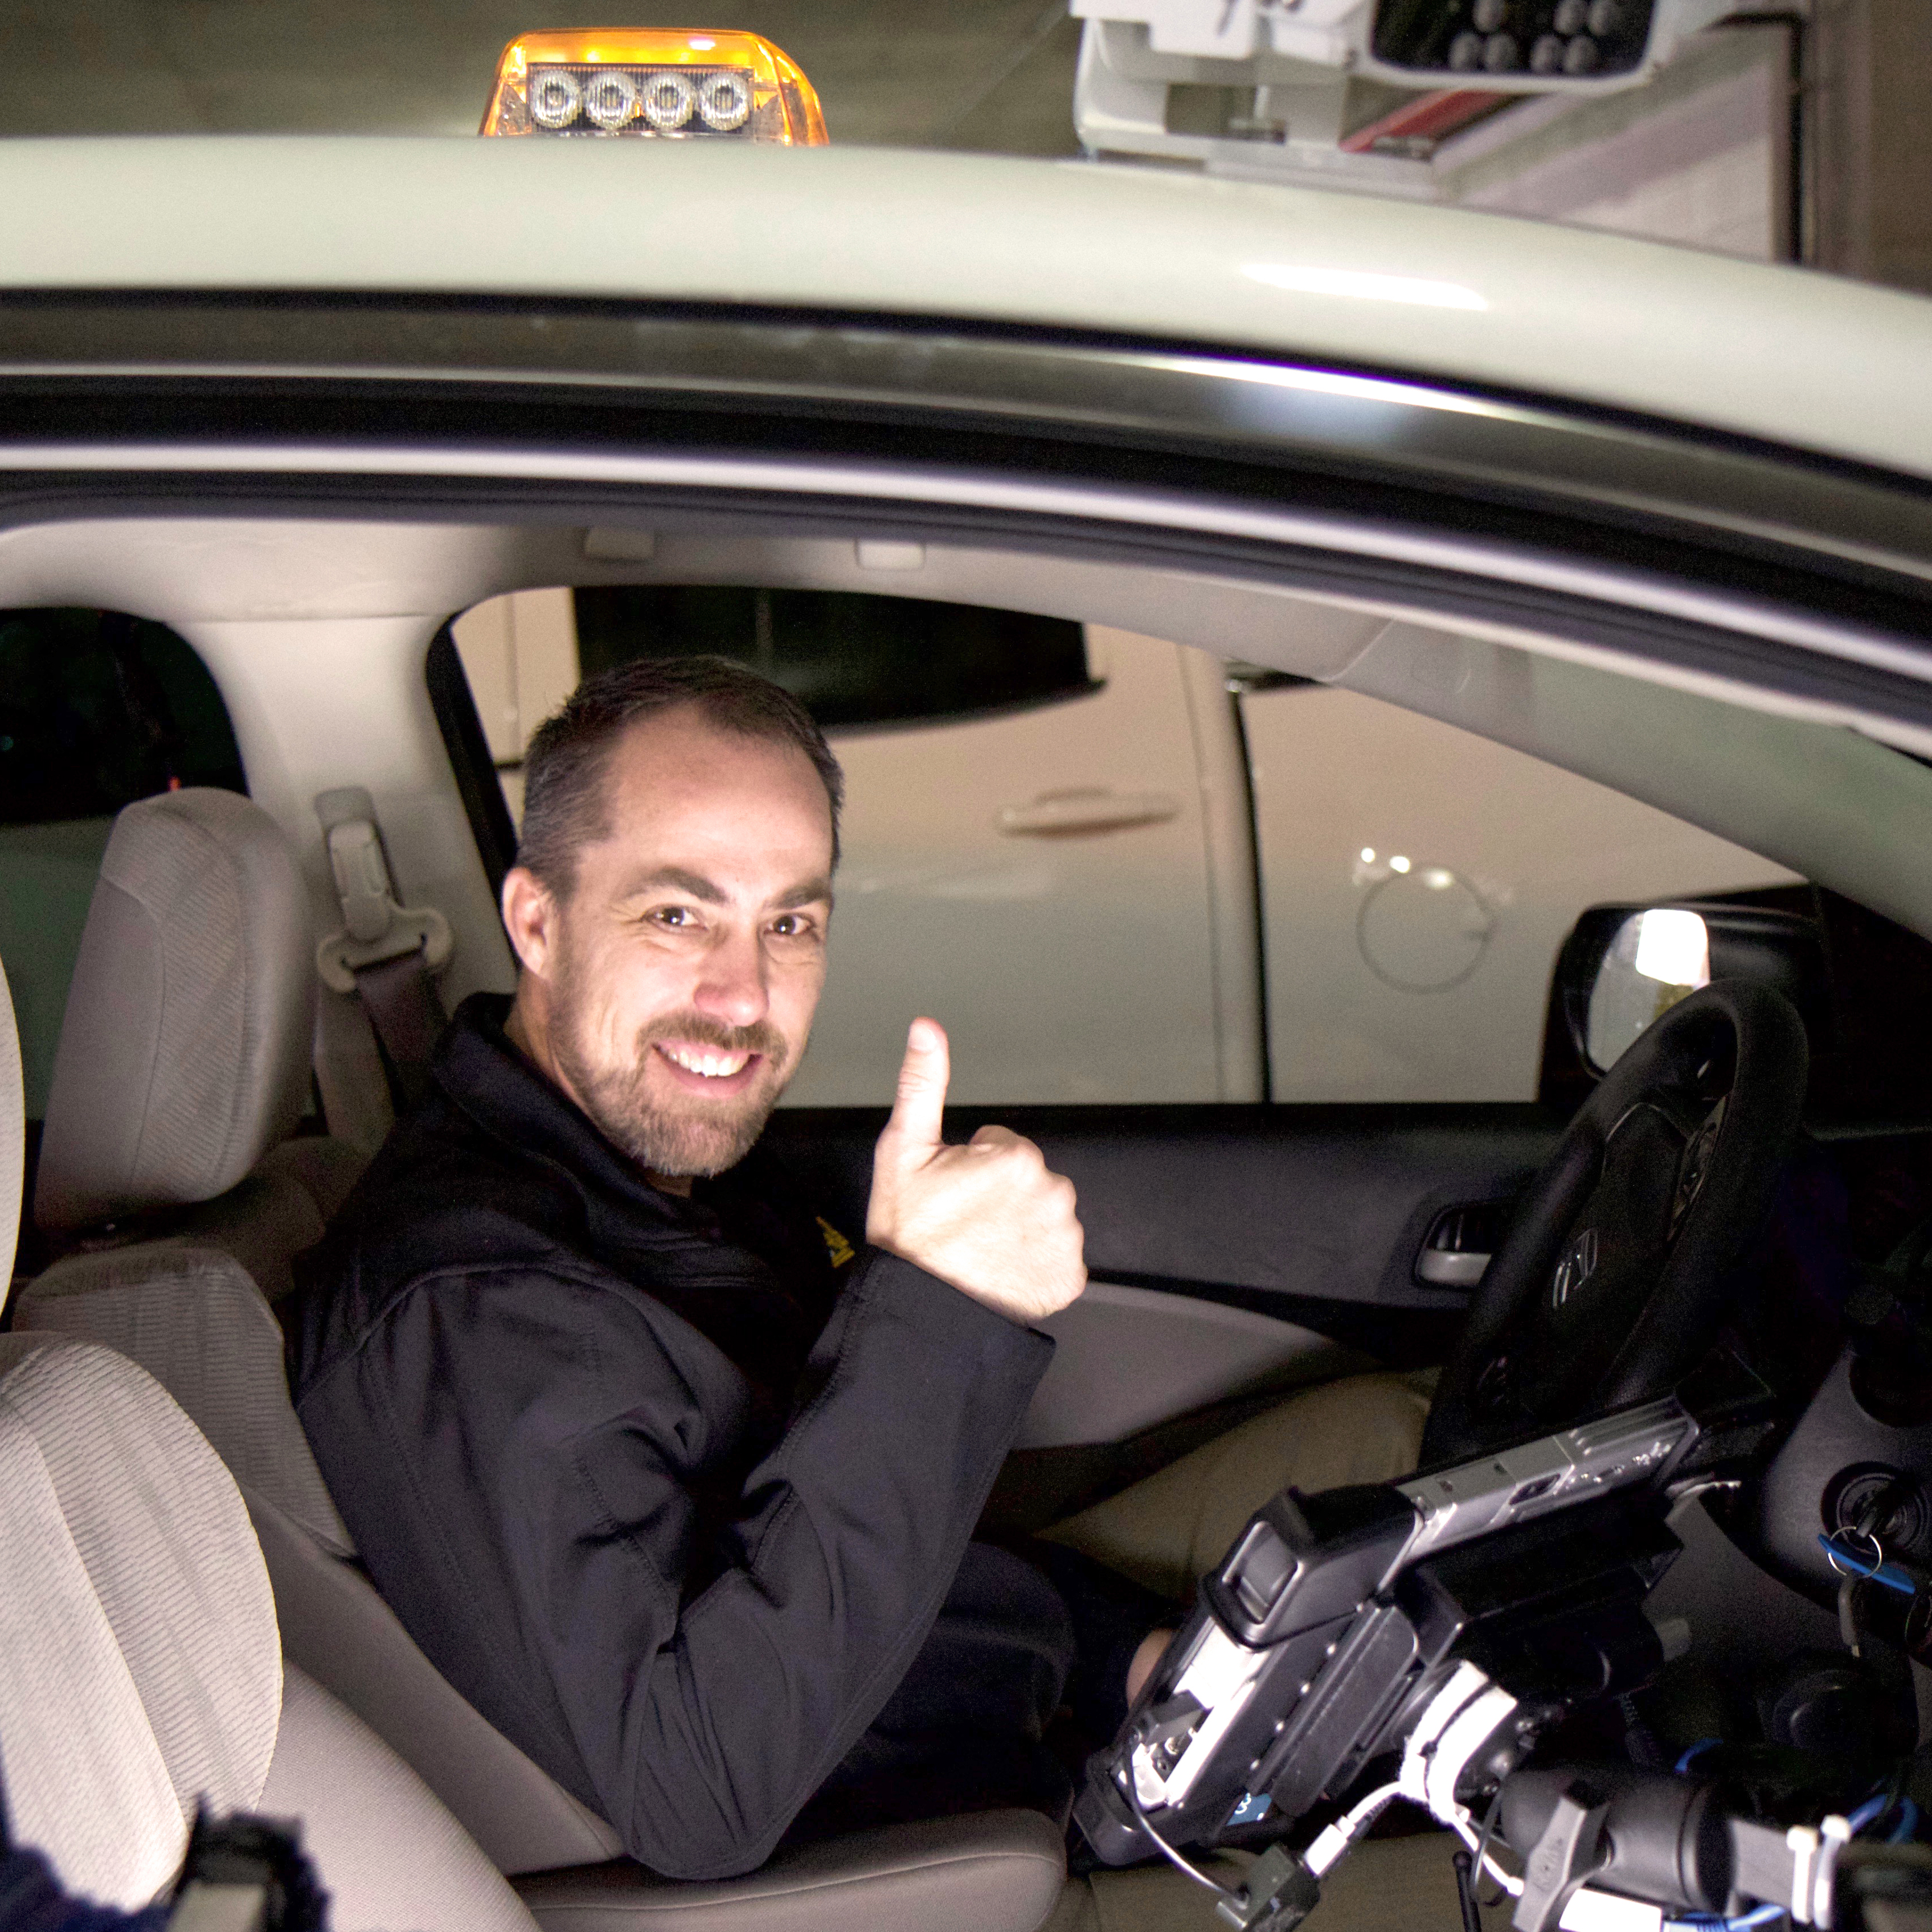 Baylor parking director giving thumbs up inside vehicle